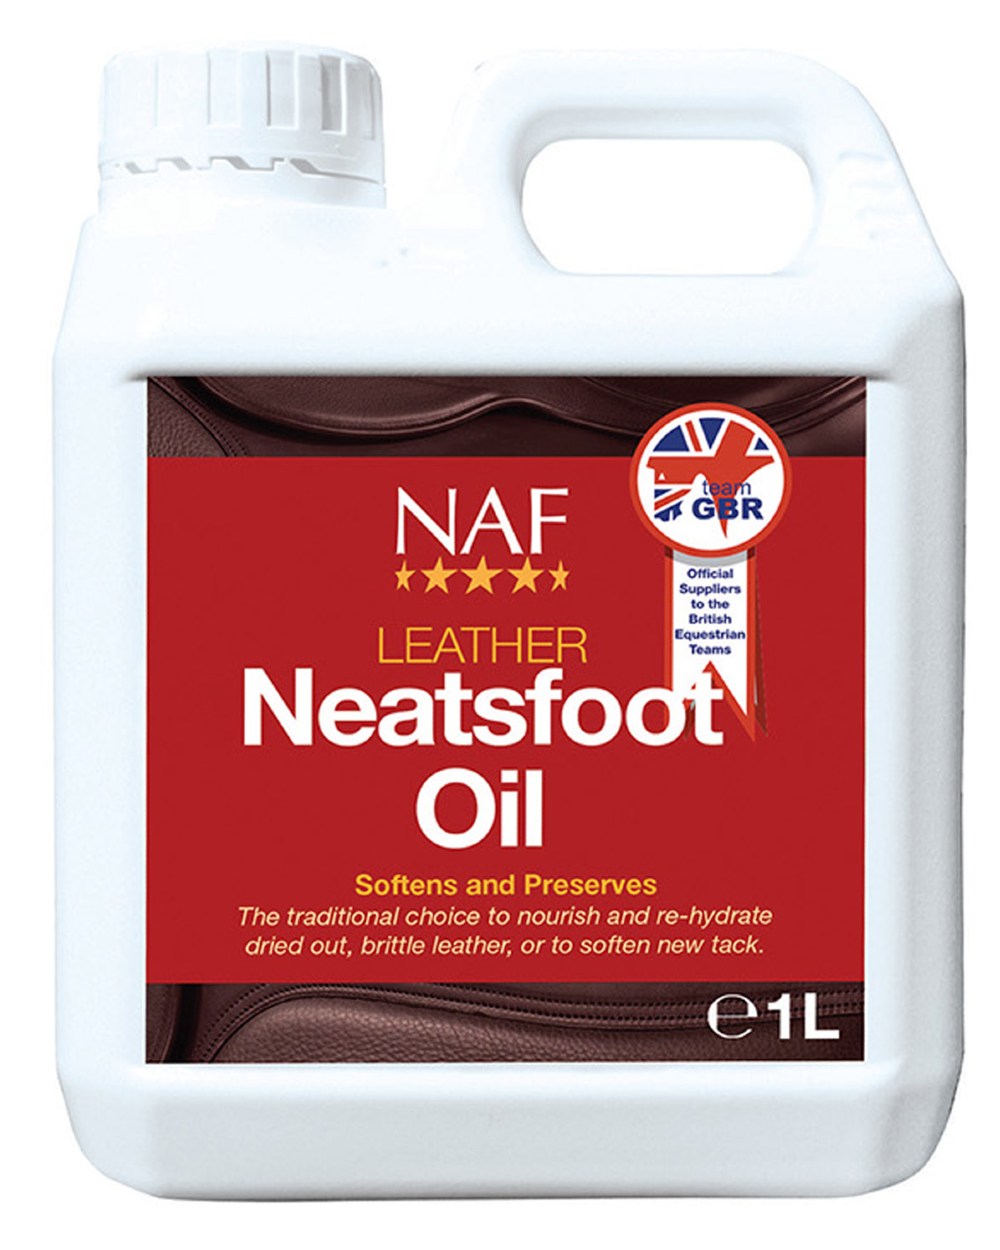 NAF Leather Neatsfoot Oil 1lt on white background